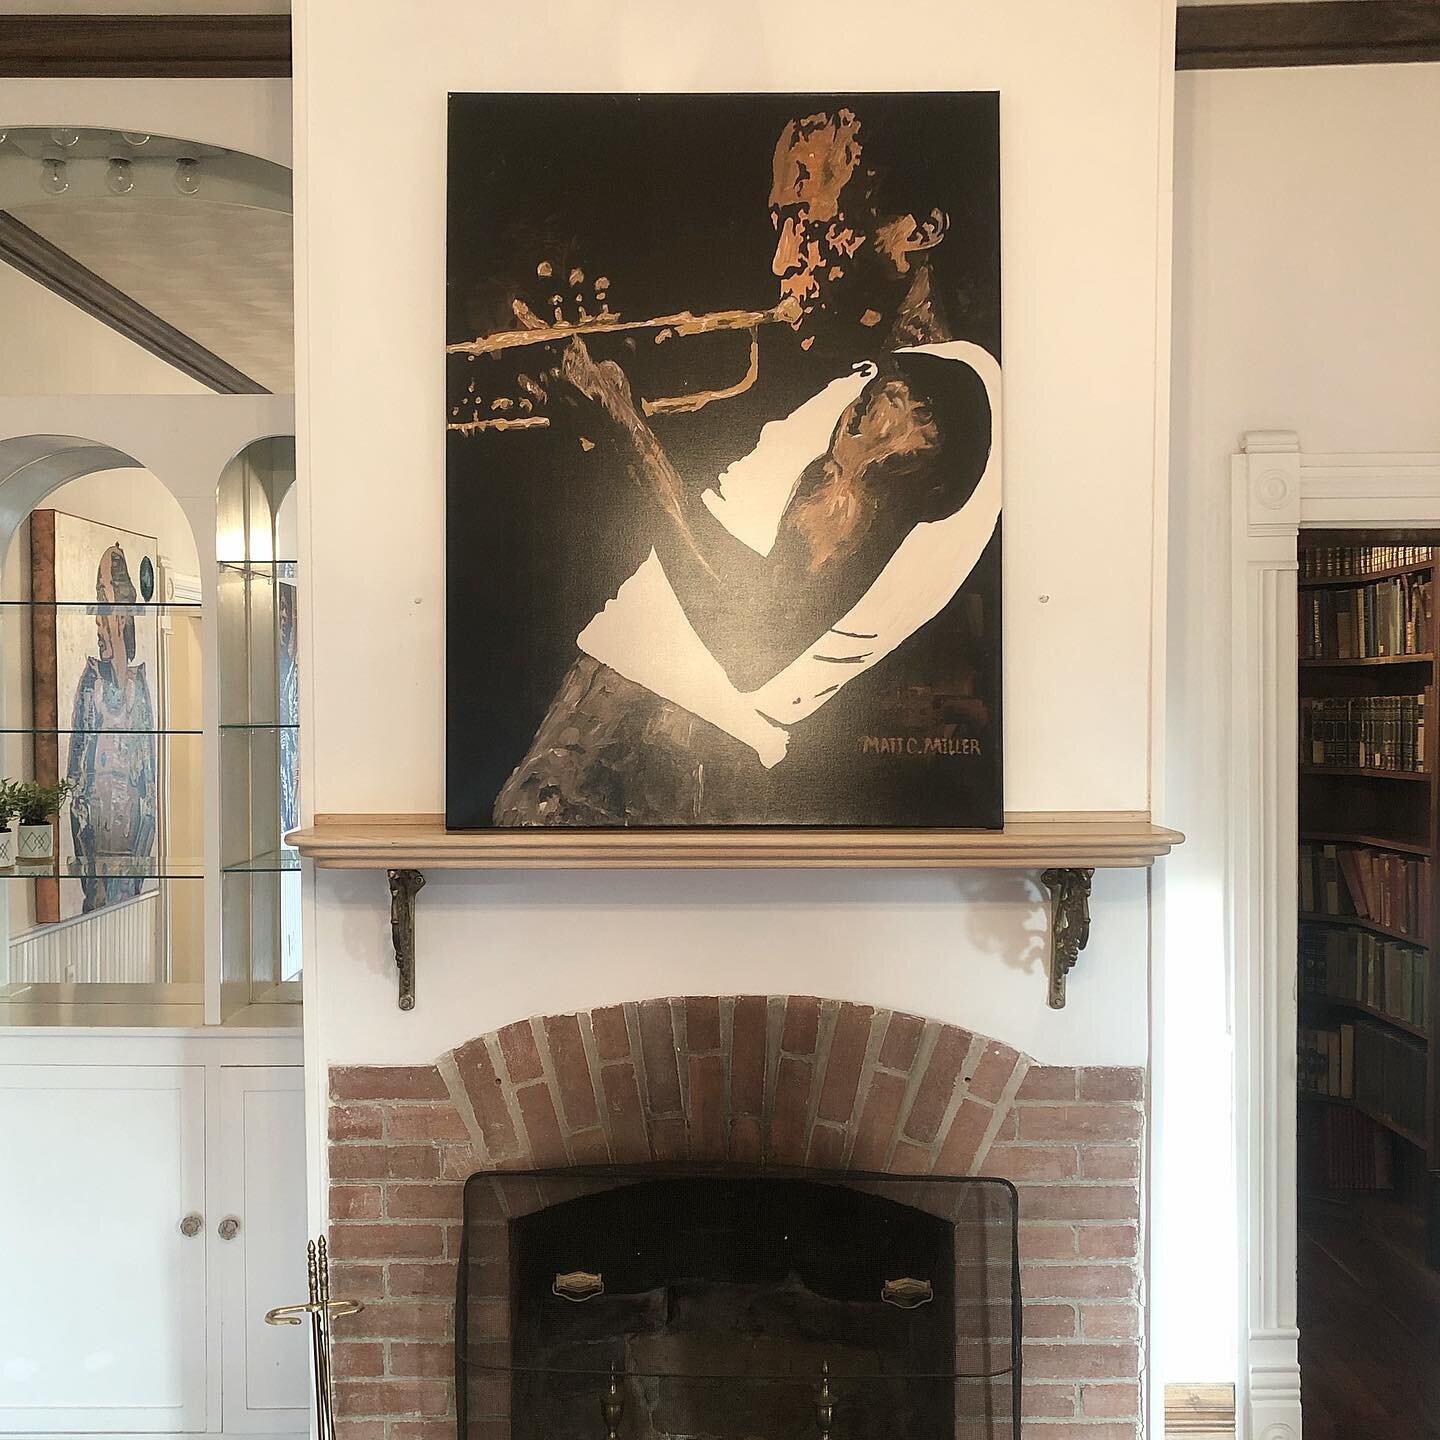 &ldquo;Miles Davis&rdquo; with &ldquo;Warrior of the Light&rdquo; in the background. After  the @naturalstaterockandrepublic showcase Miles made his way to a new home in California 😎🙏
.
#arkansasartist #art #legend #musician #trumpet